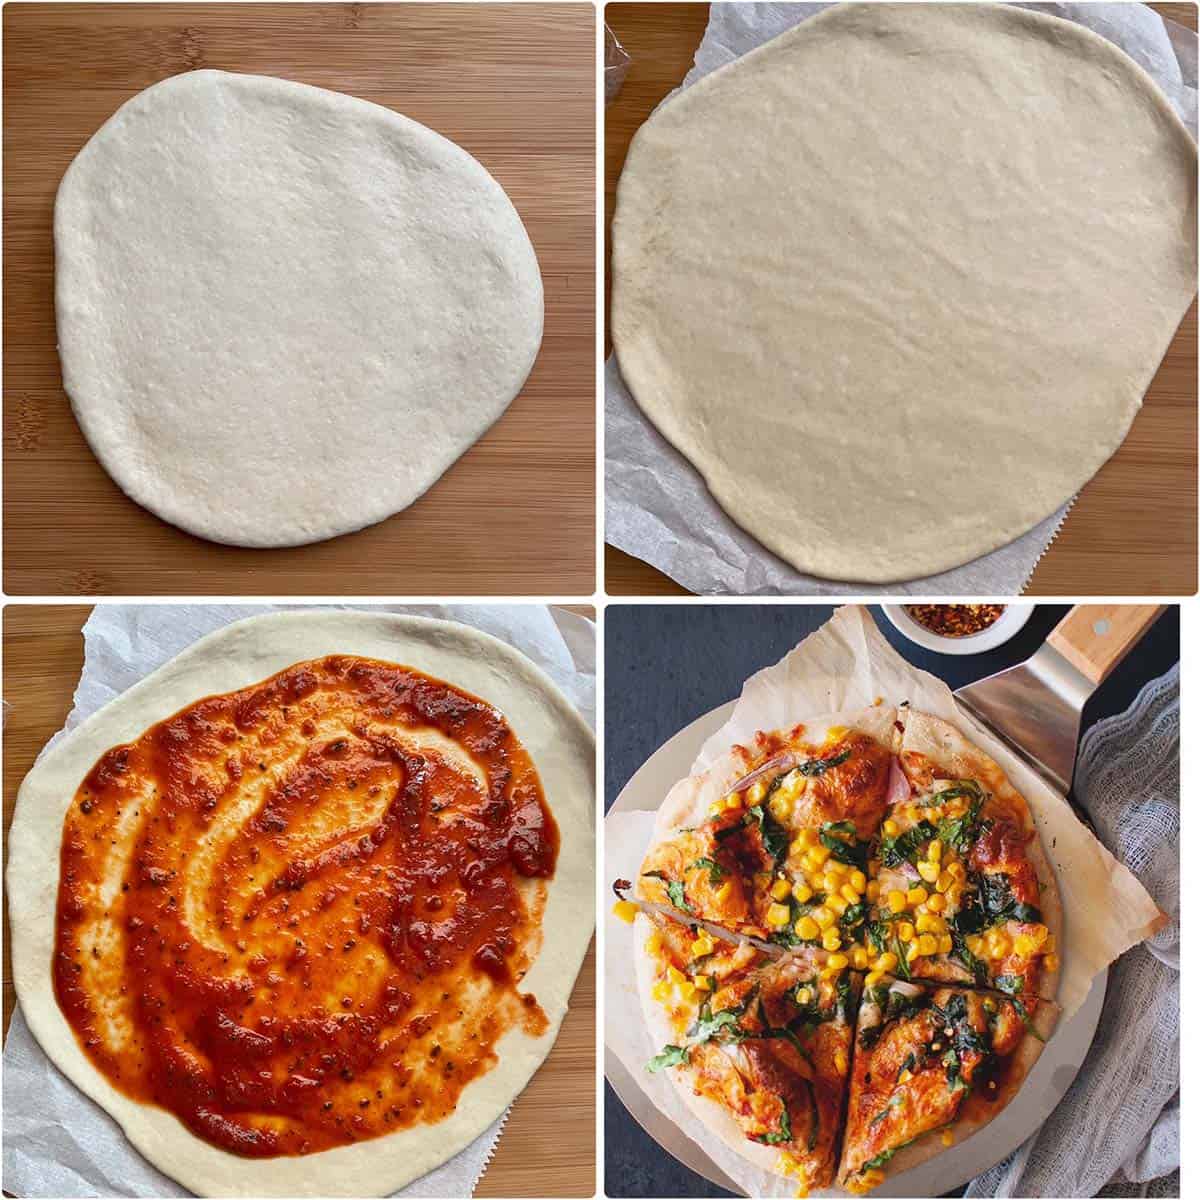 4 panel photo showing the making of vegetable pizza.